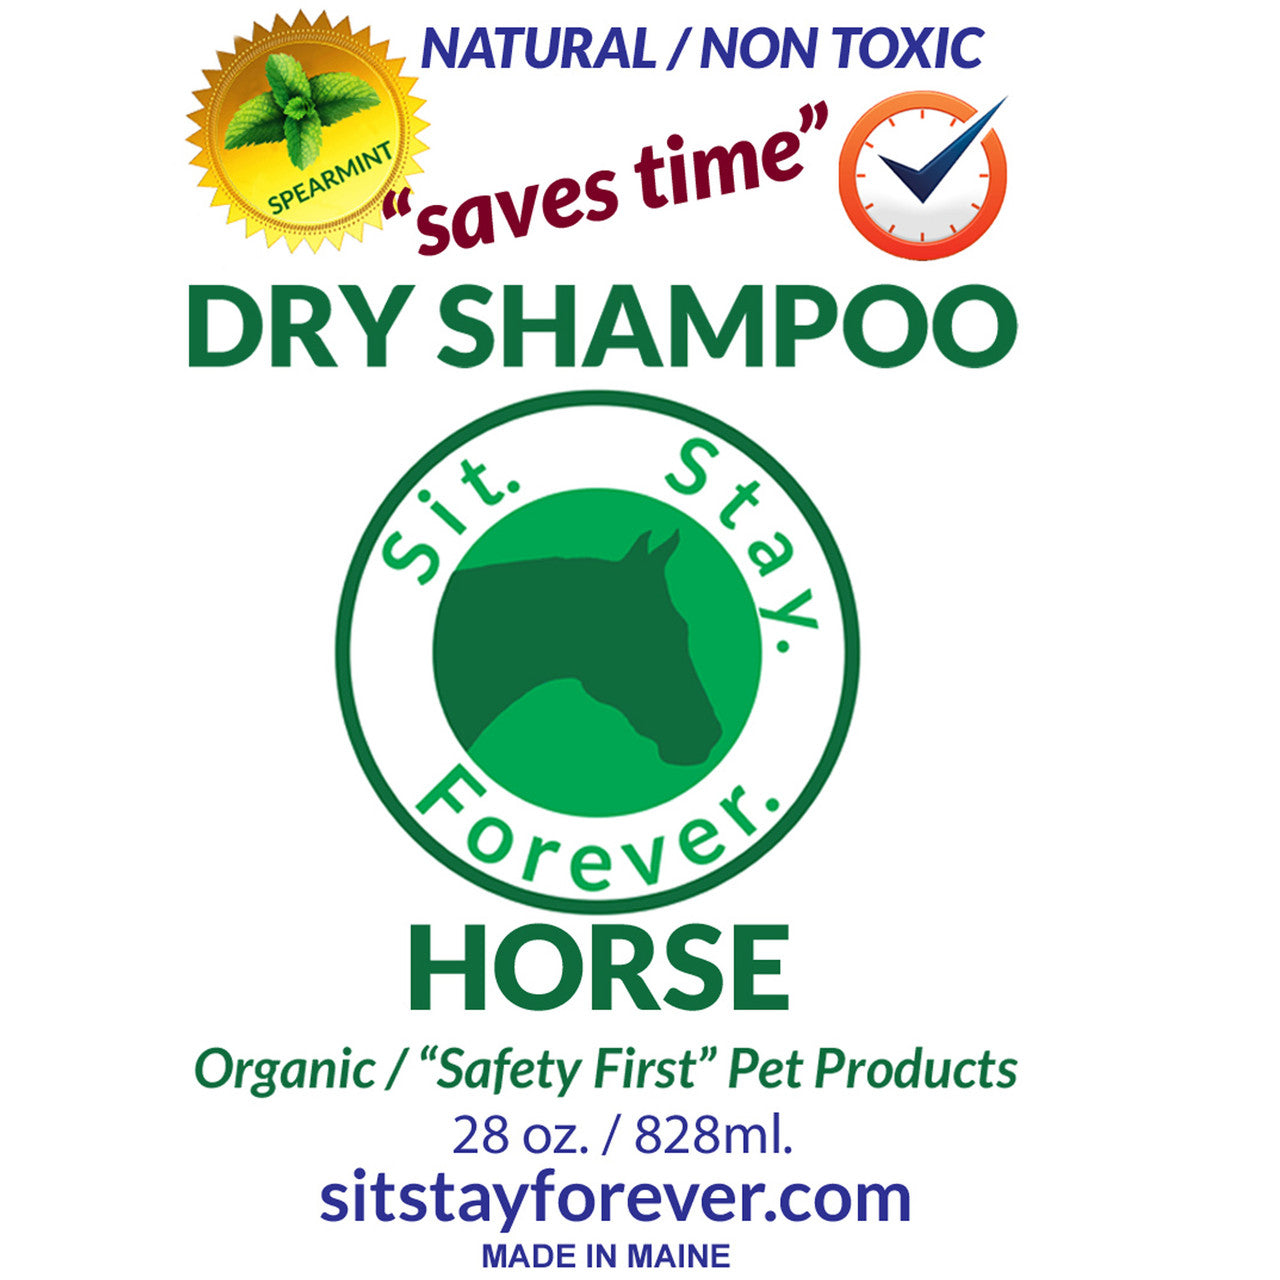 Label of Sit.Stay.Forever. dry shampoo for horses. It highlights that the product is natural, non-toxic, and spearmint-scented. The label mentions it "saves time" and includes the Sit. Stay. Forever. logo with a green horse silhouette. The product is organic and marketed as "Safety First" Pet Products, available in a 28 oz (828 ml) size. The website sitstayforever.com and "Made in Maine" are also displayed.